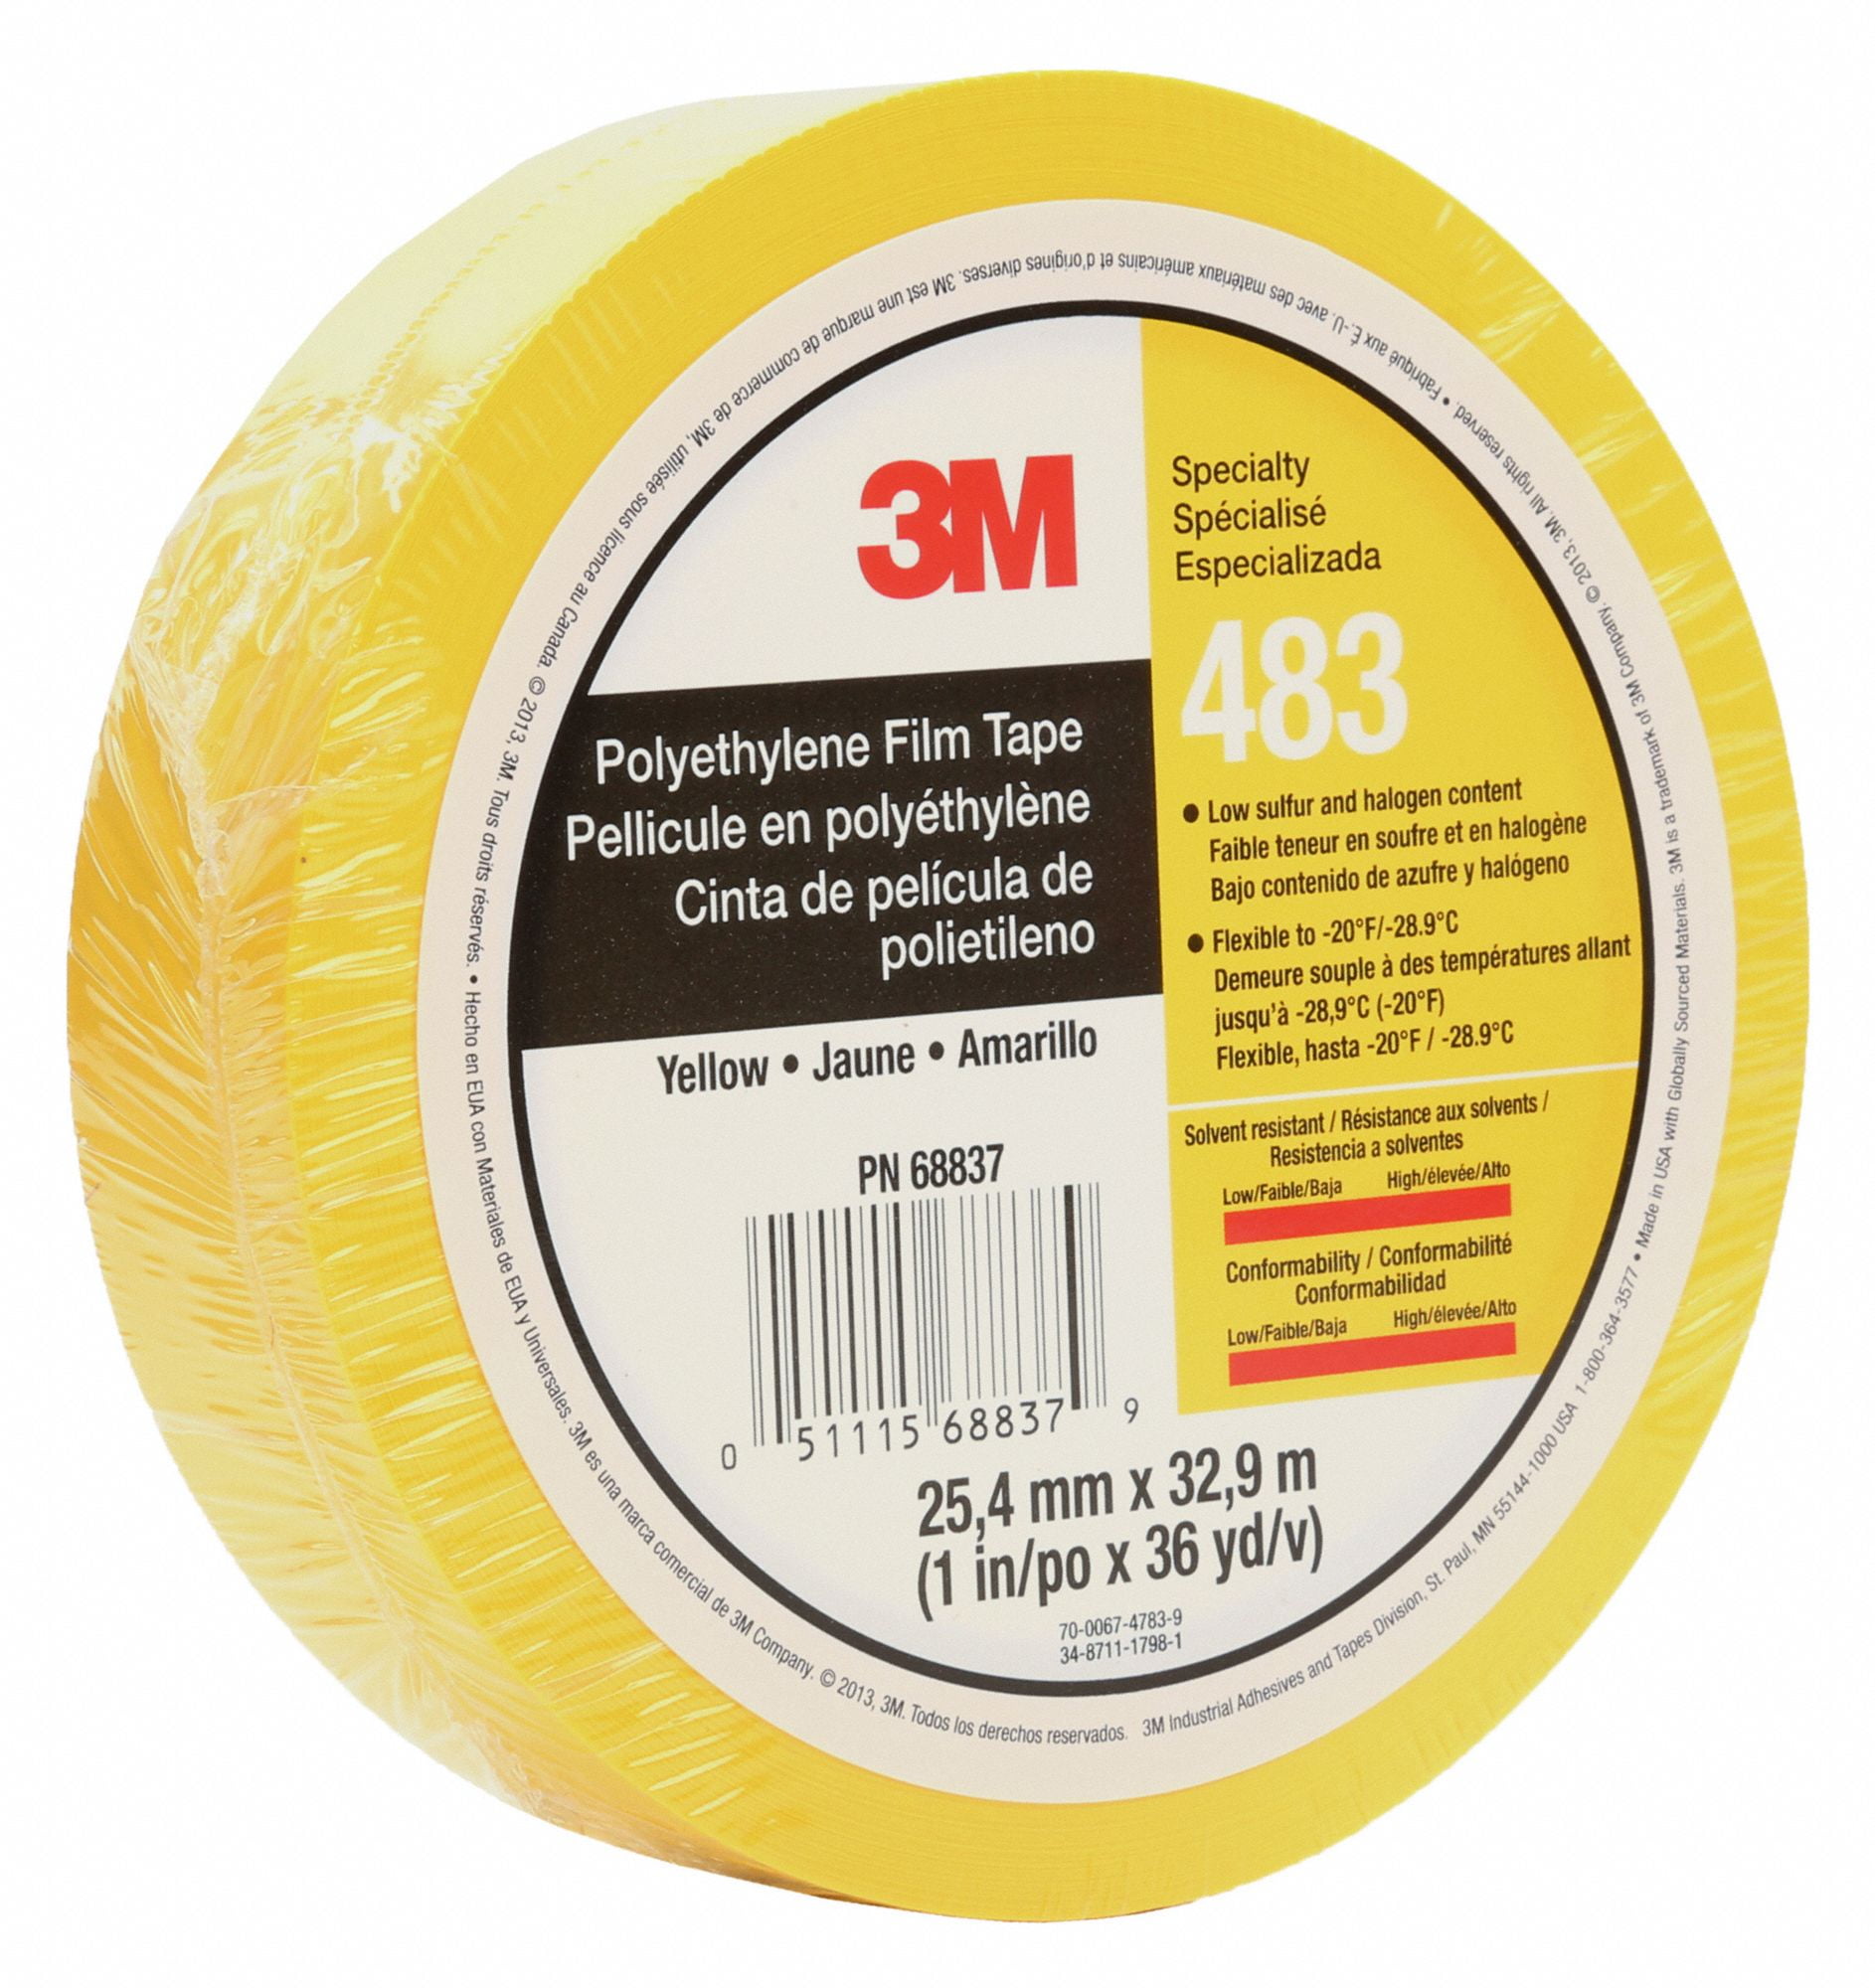 3M 483 Film Tape,1 in x 36 yd,Red,5.3 mil 